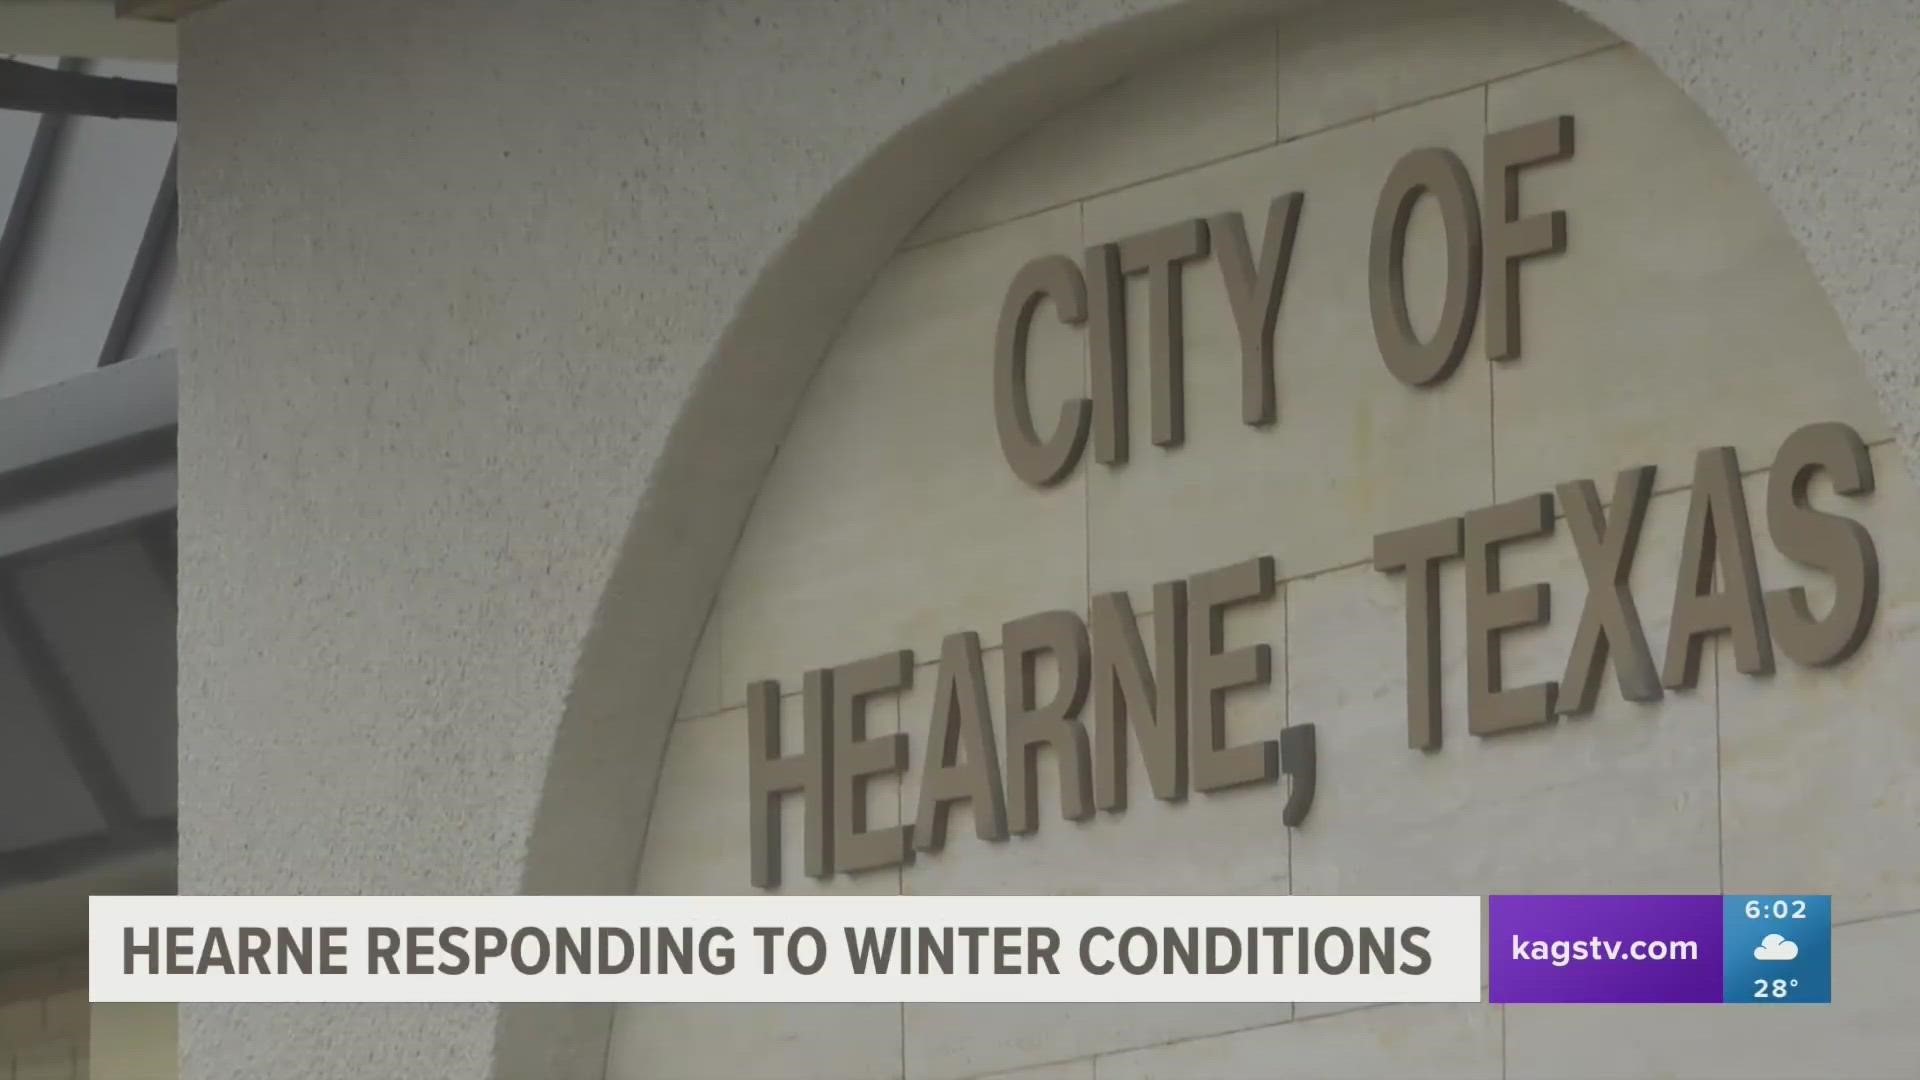 Miguel Vasquez, the Assistant Police Chief for Hearne PD, said that they've responded to several crashes from ice on the roads.